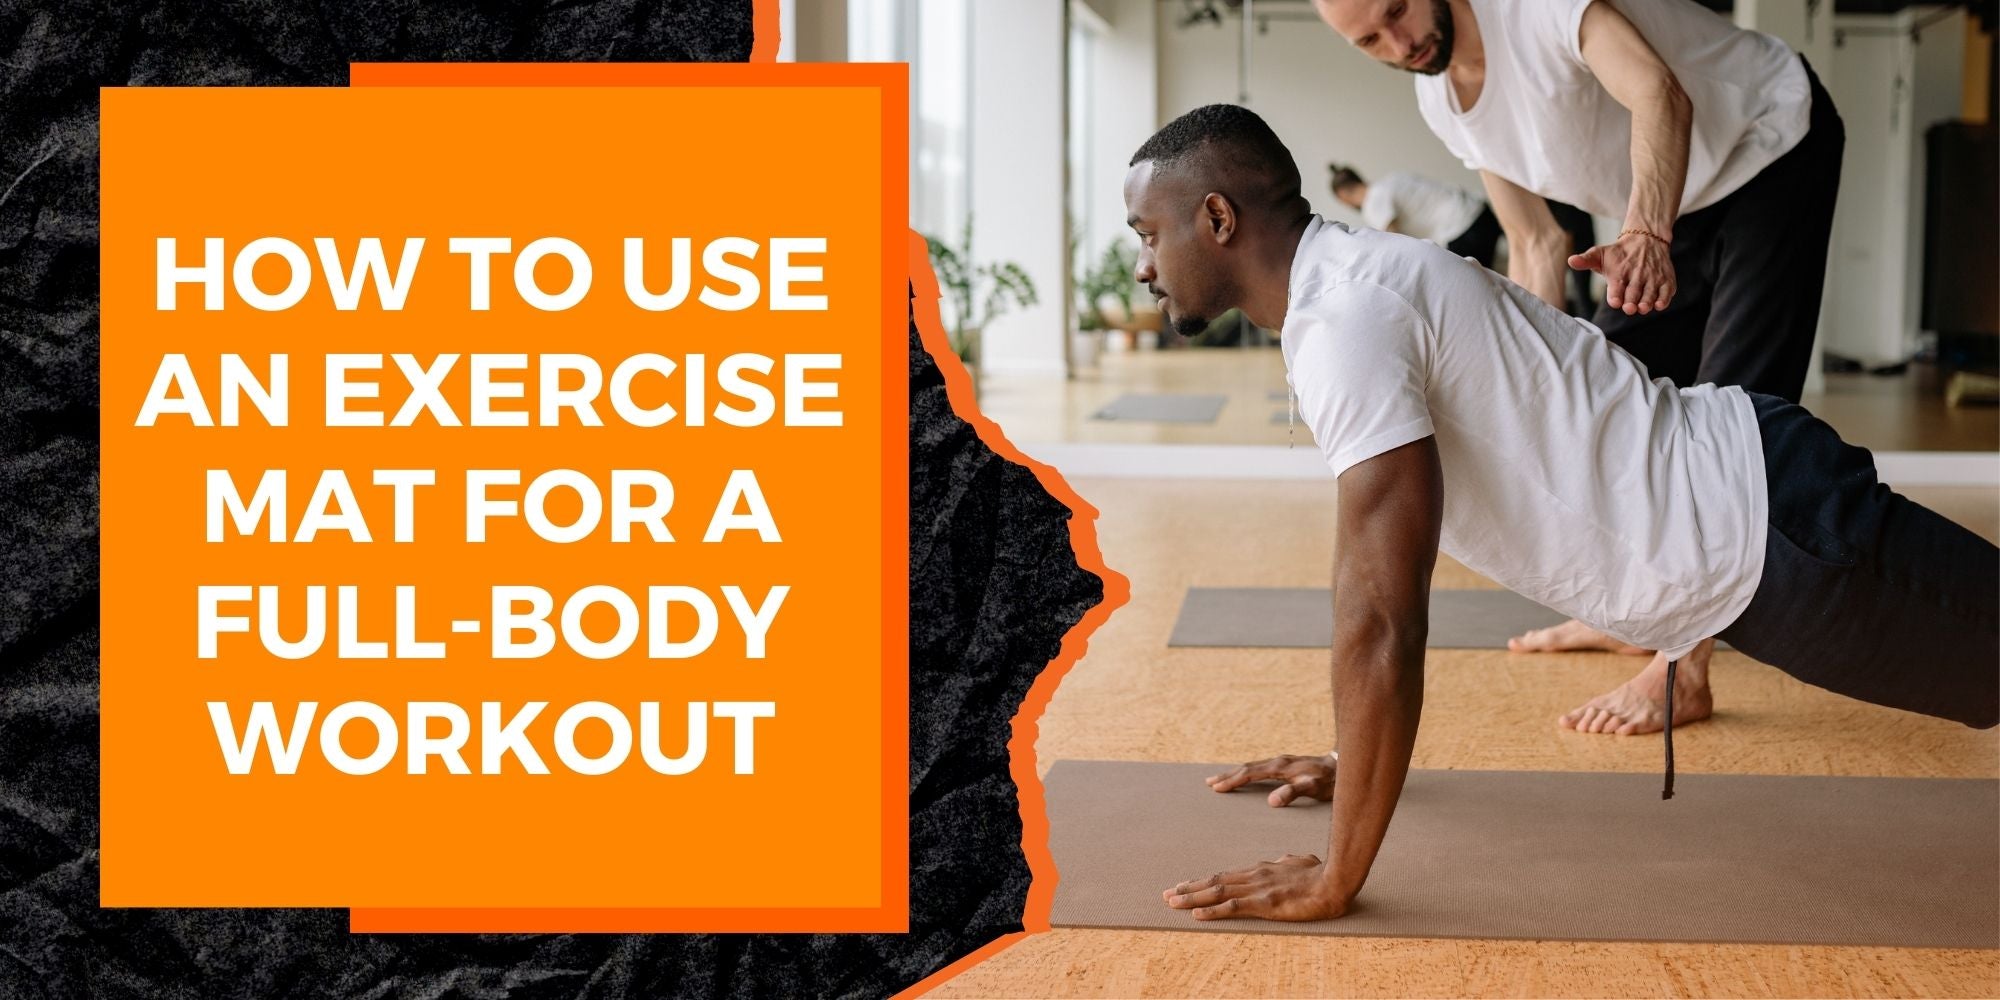 How to Use an Exercise Mat for a Full-Body Workout